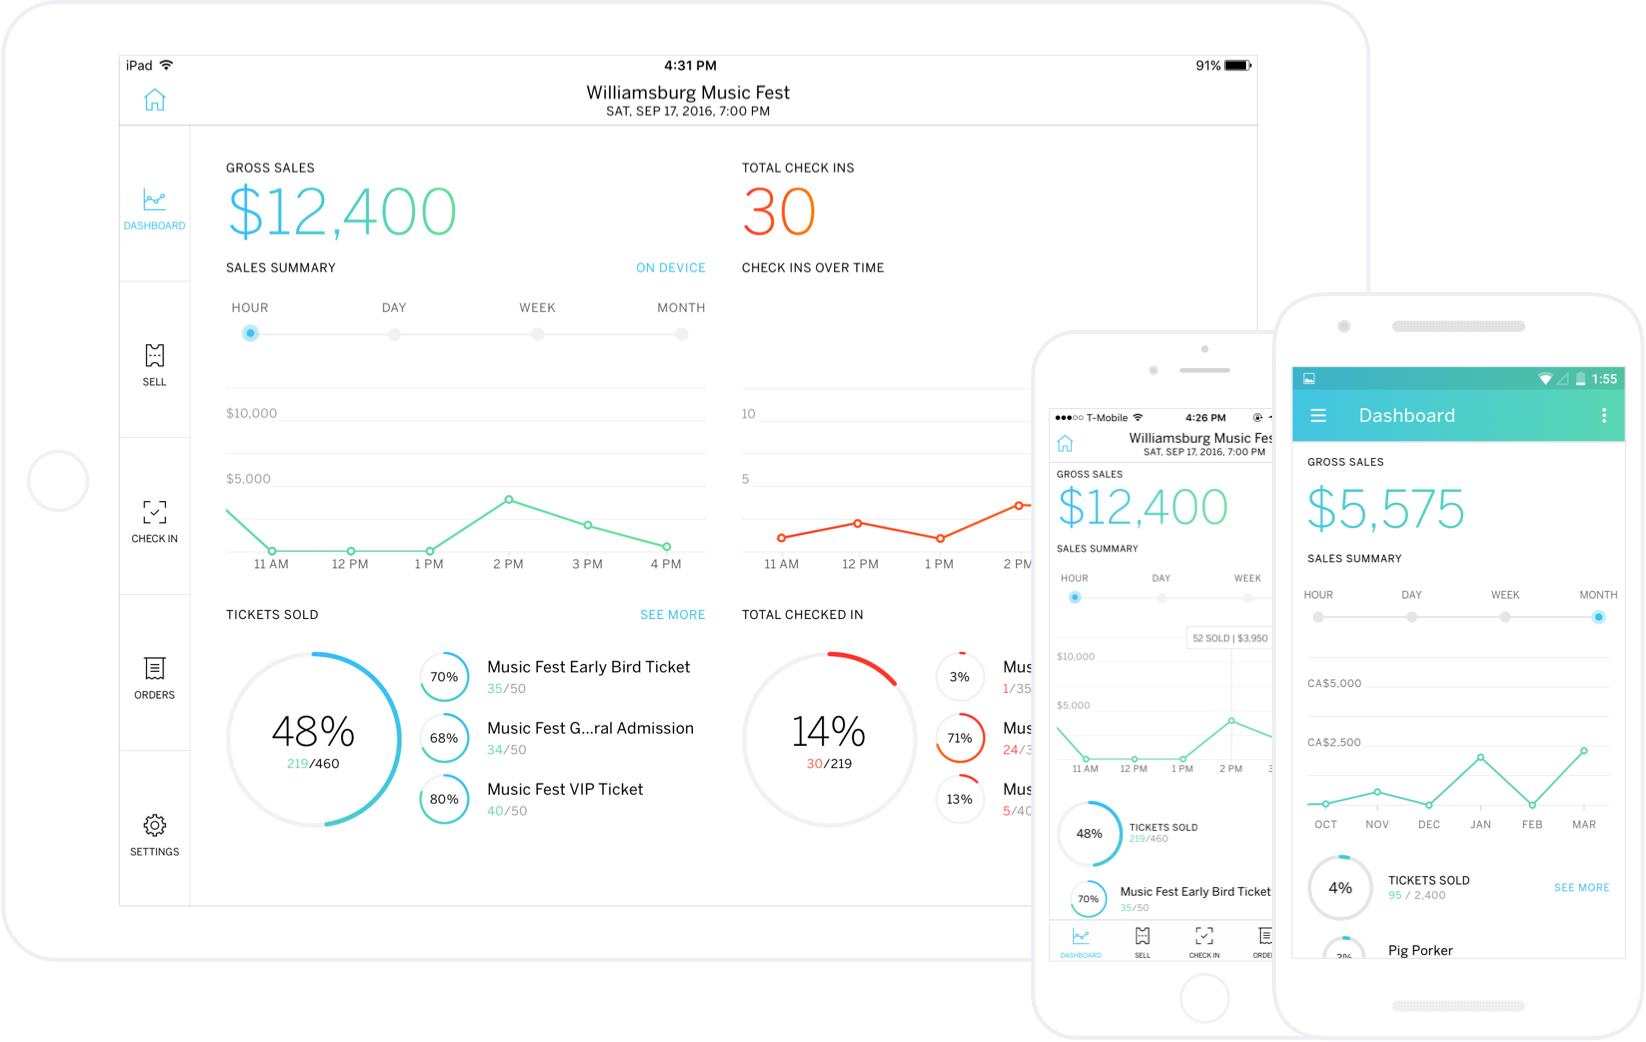 Eventbrite Software - Access reports and analytics on sales and attendance